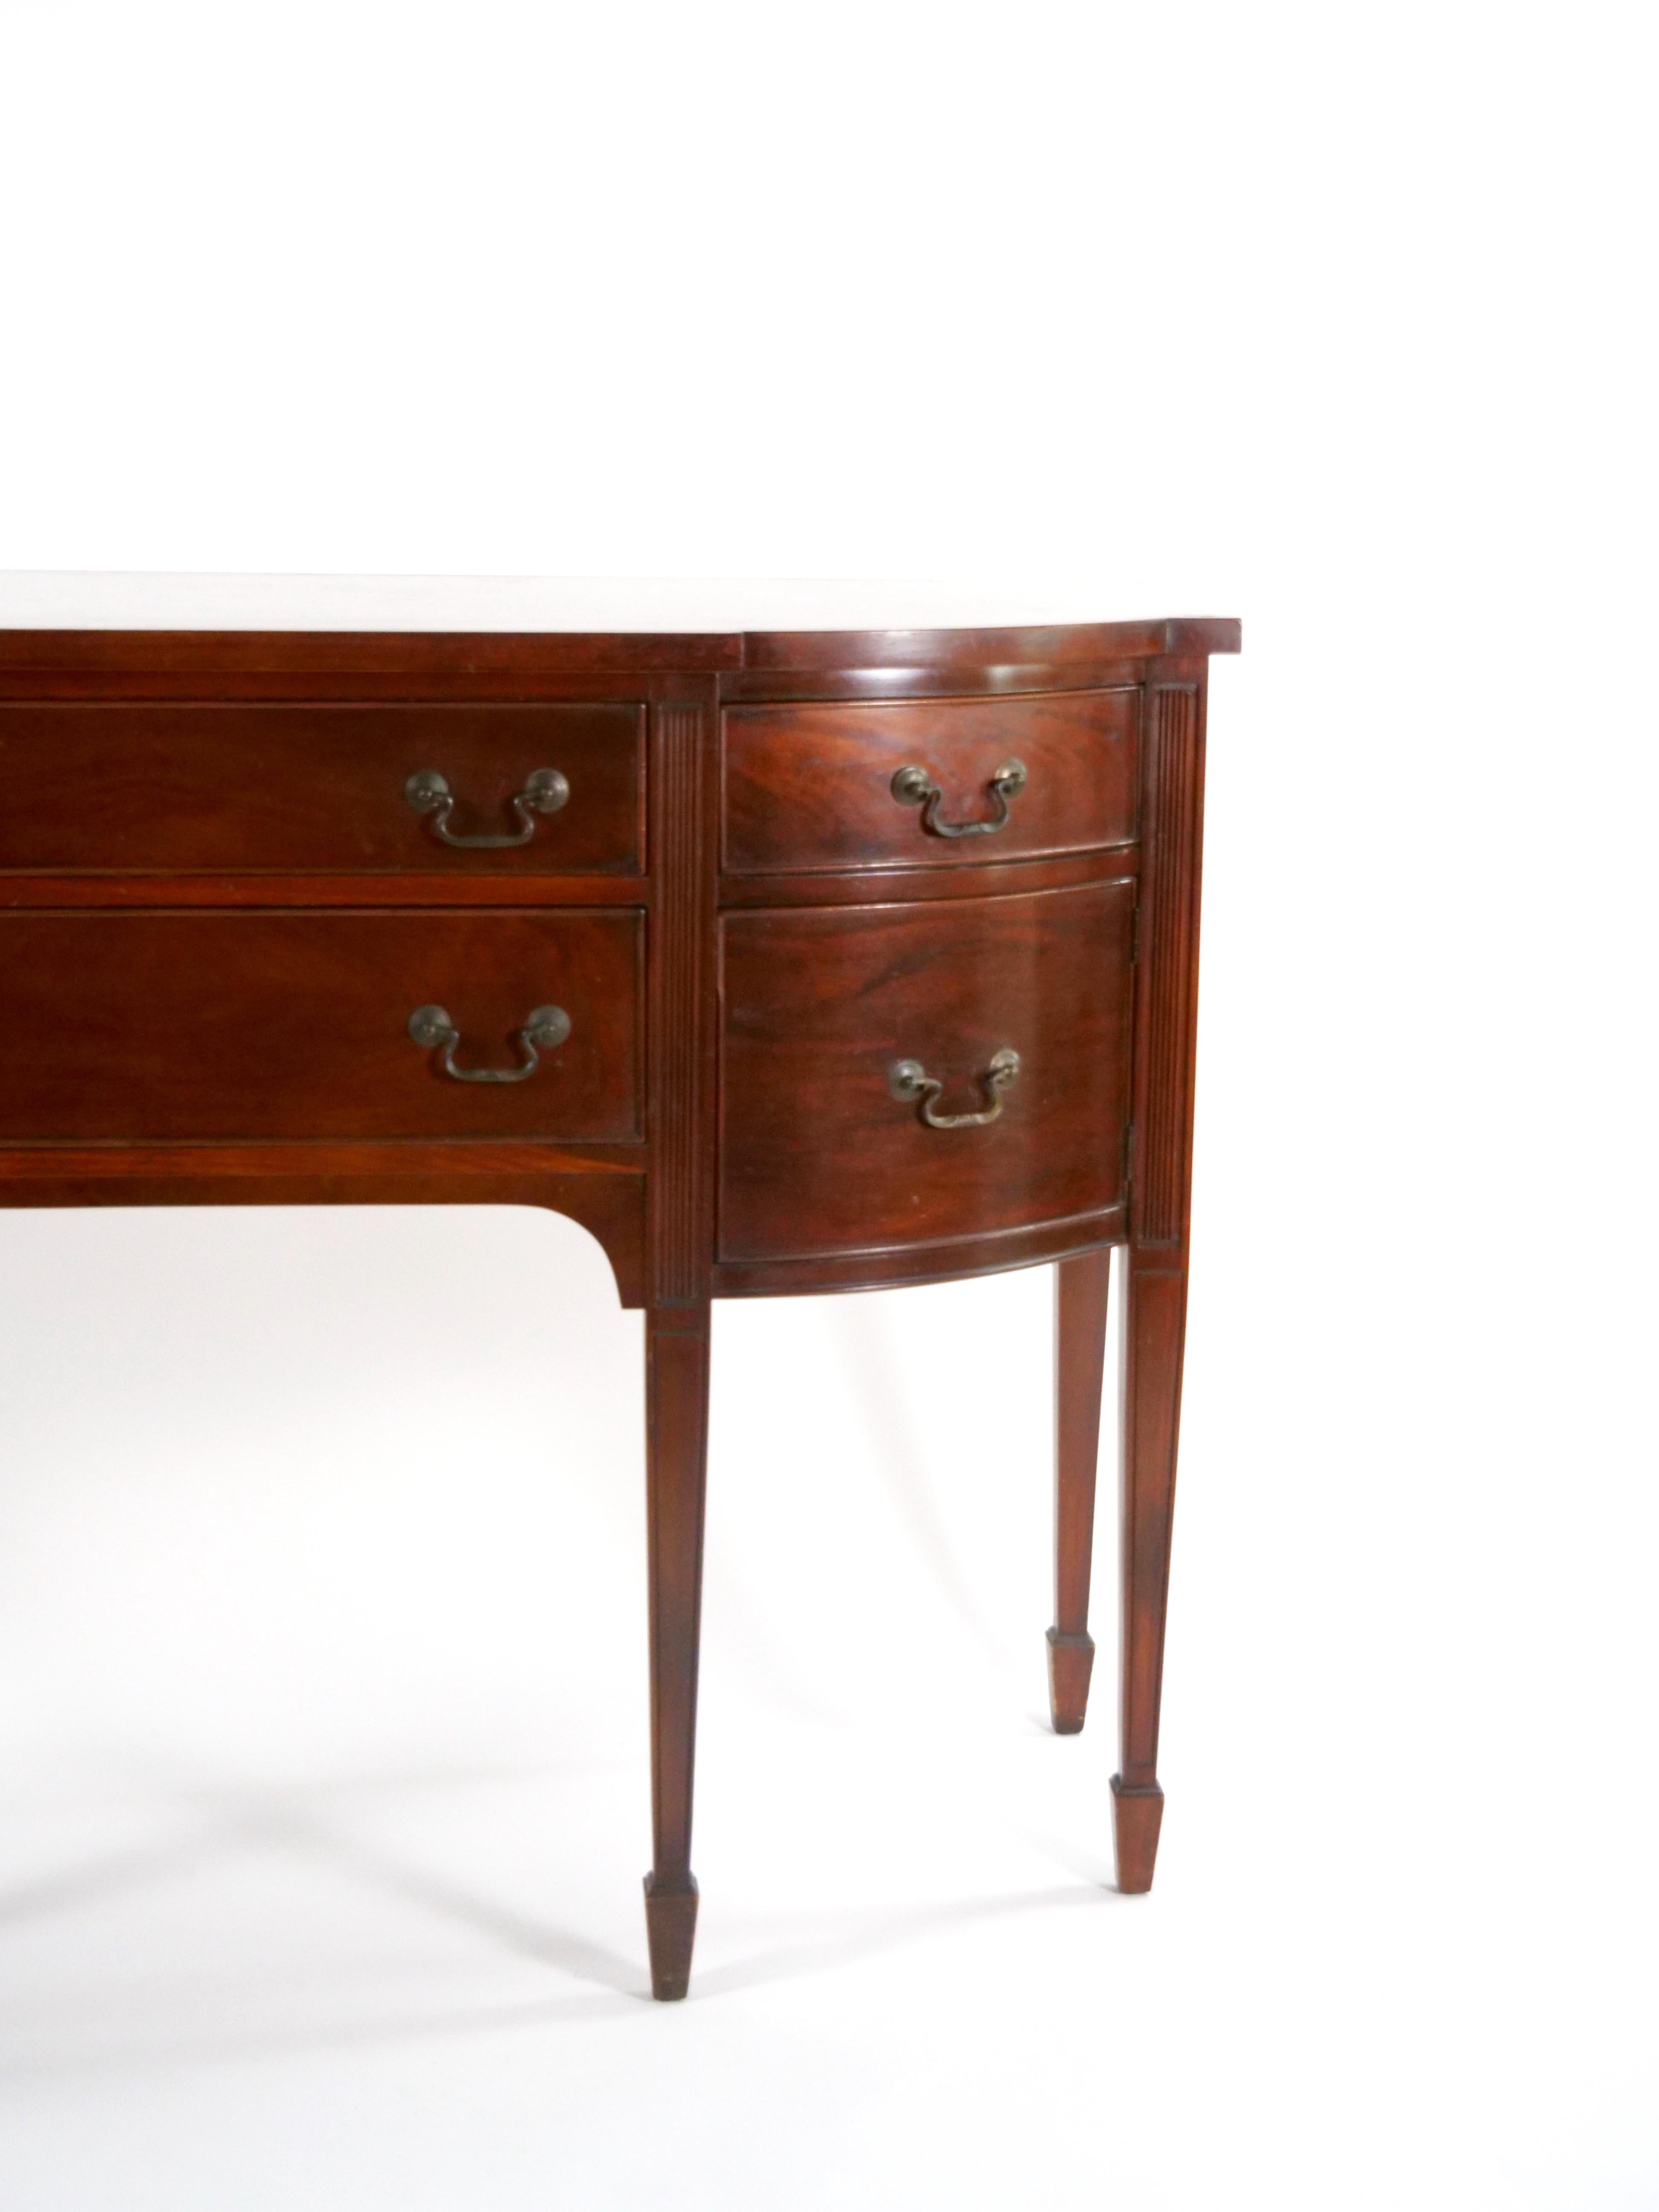 American 19th century Mahogany Wood Bow Front Buffet / Server  For Sale